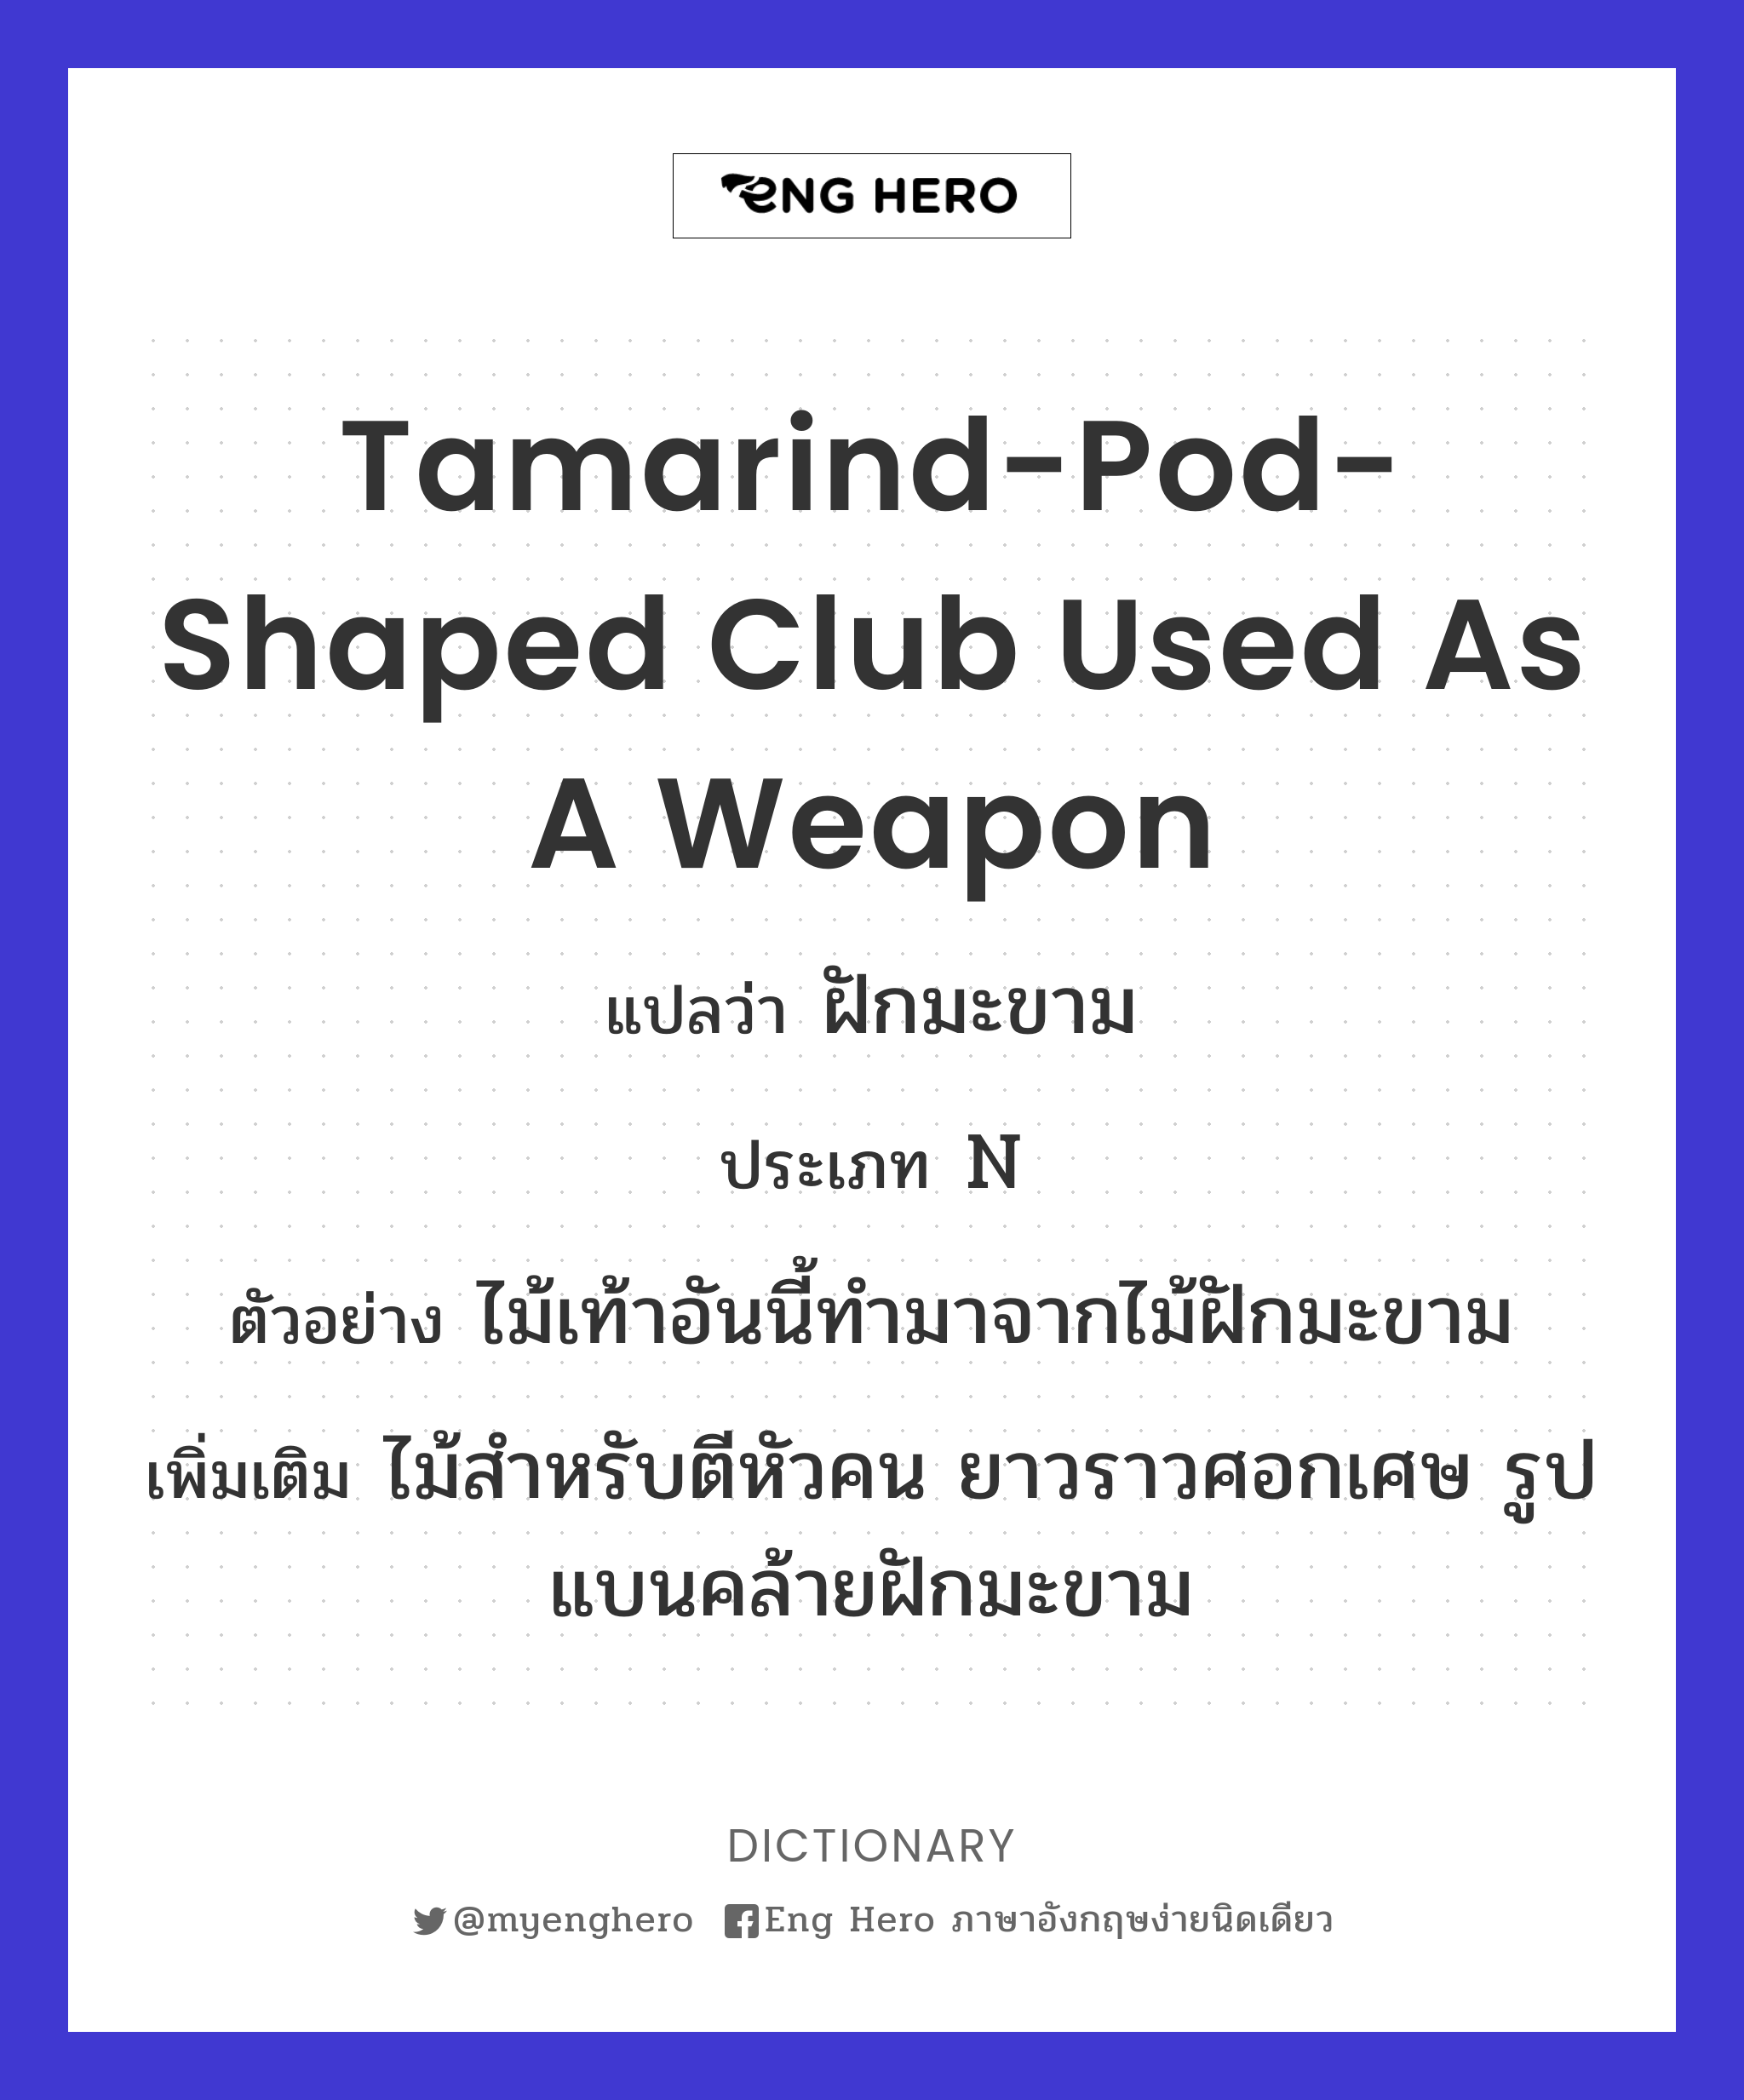 tamarind-pod-shaped club used as a weapon